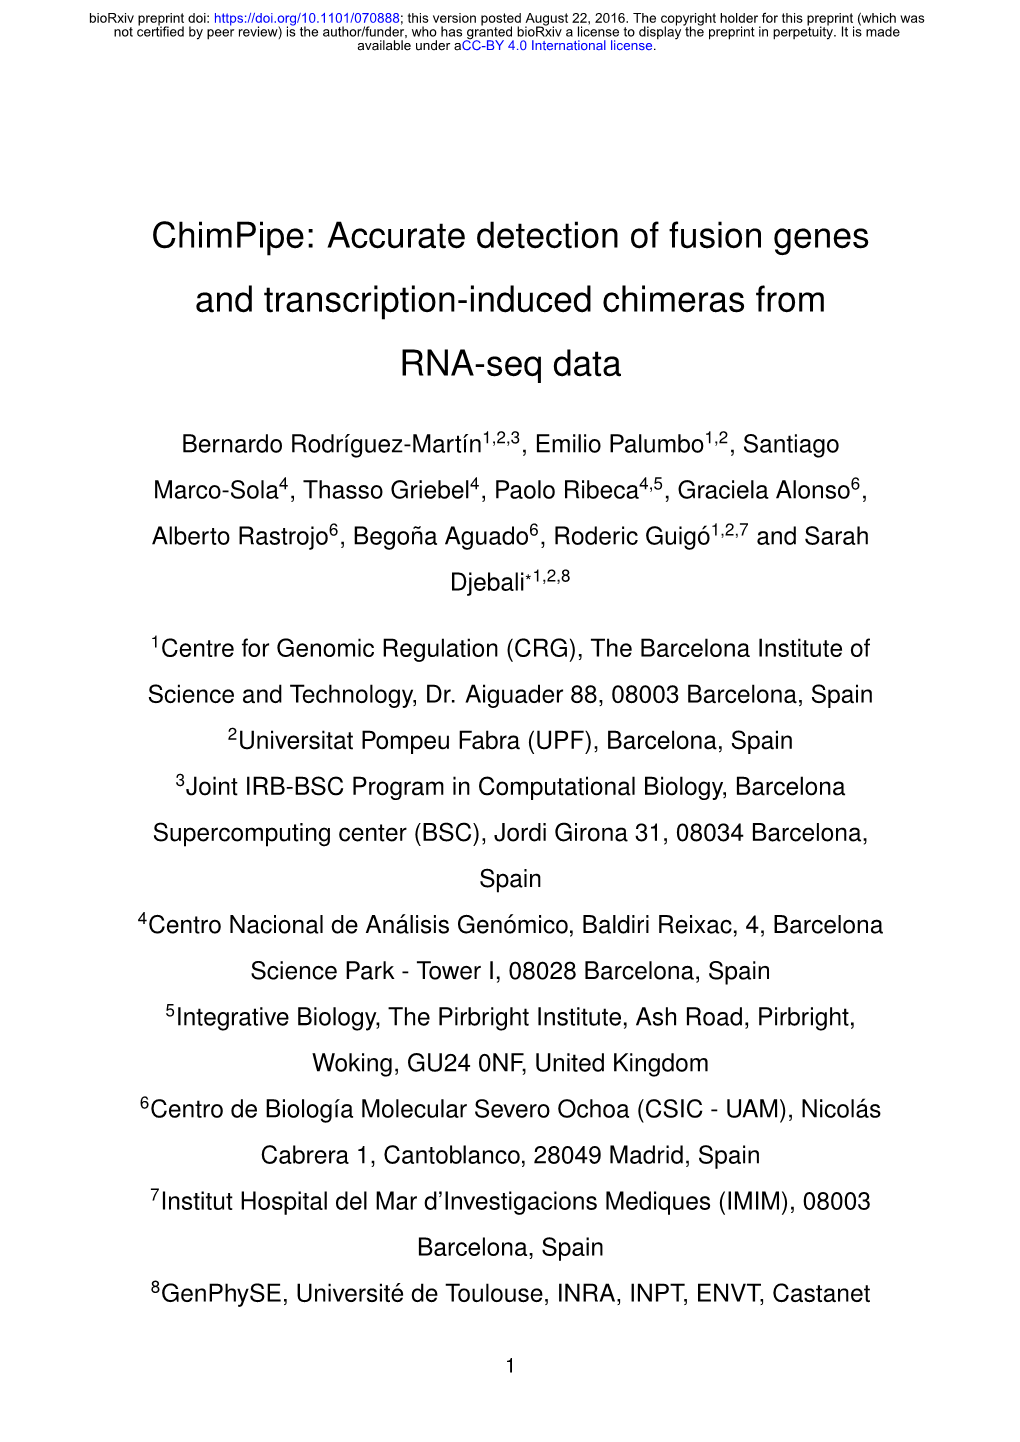 Accurate Detection of Fusion Genes and Transcription-Induced Chimeras from RNA-Seq Data